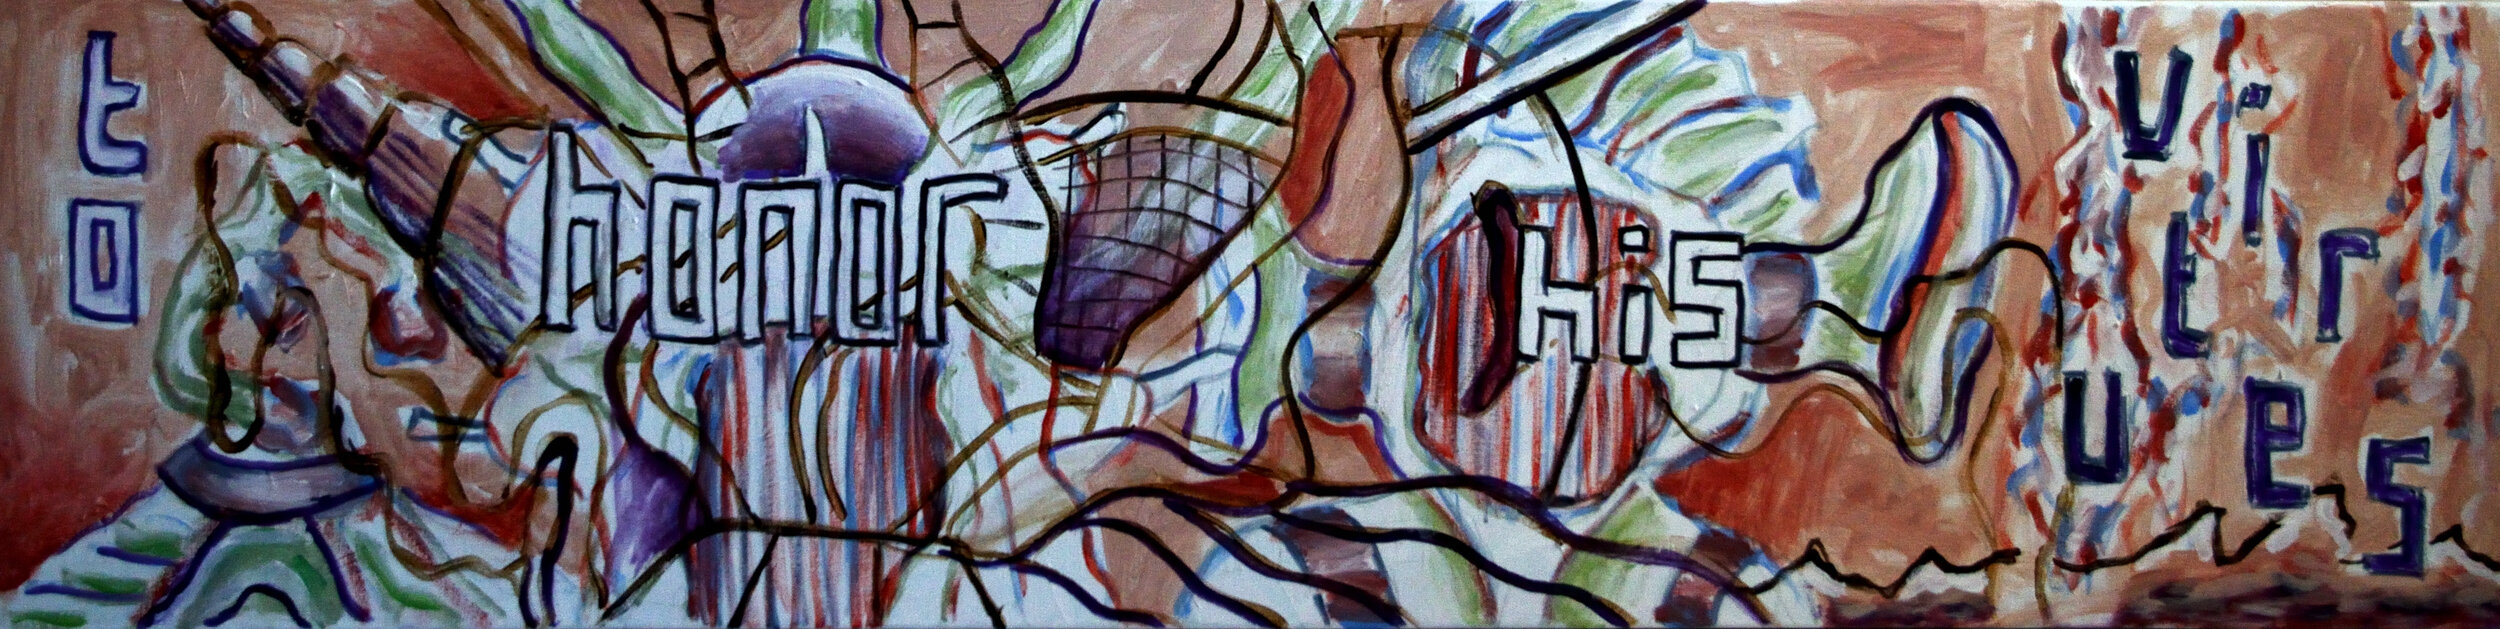 To Honor His Virtues, acrylic on canvas, 40x160cm, 2020